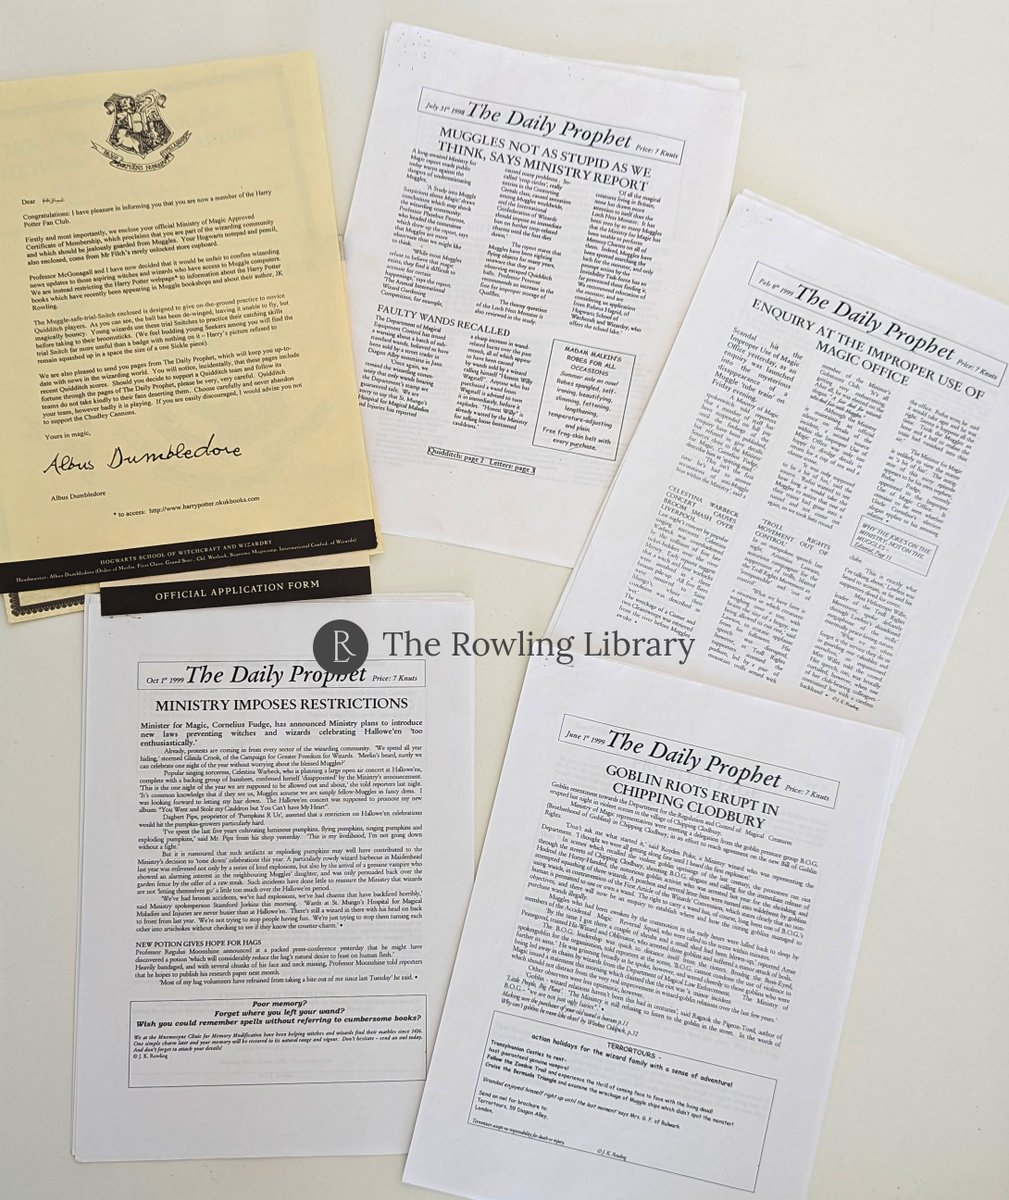 In 1998 and 1999, members of Bloomsbury's official Harry Potter Fan Club received 4 issues of The Daily Prophet Newsletter: they were fictional copies of the magical newspaper. The incredible part? They were entirely written by @jk_rowling (though I wonder whether Rowling also